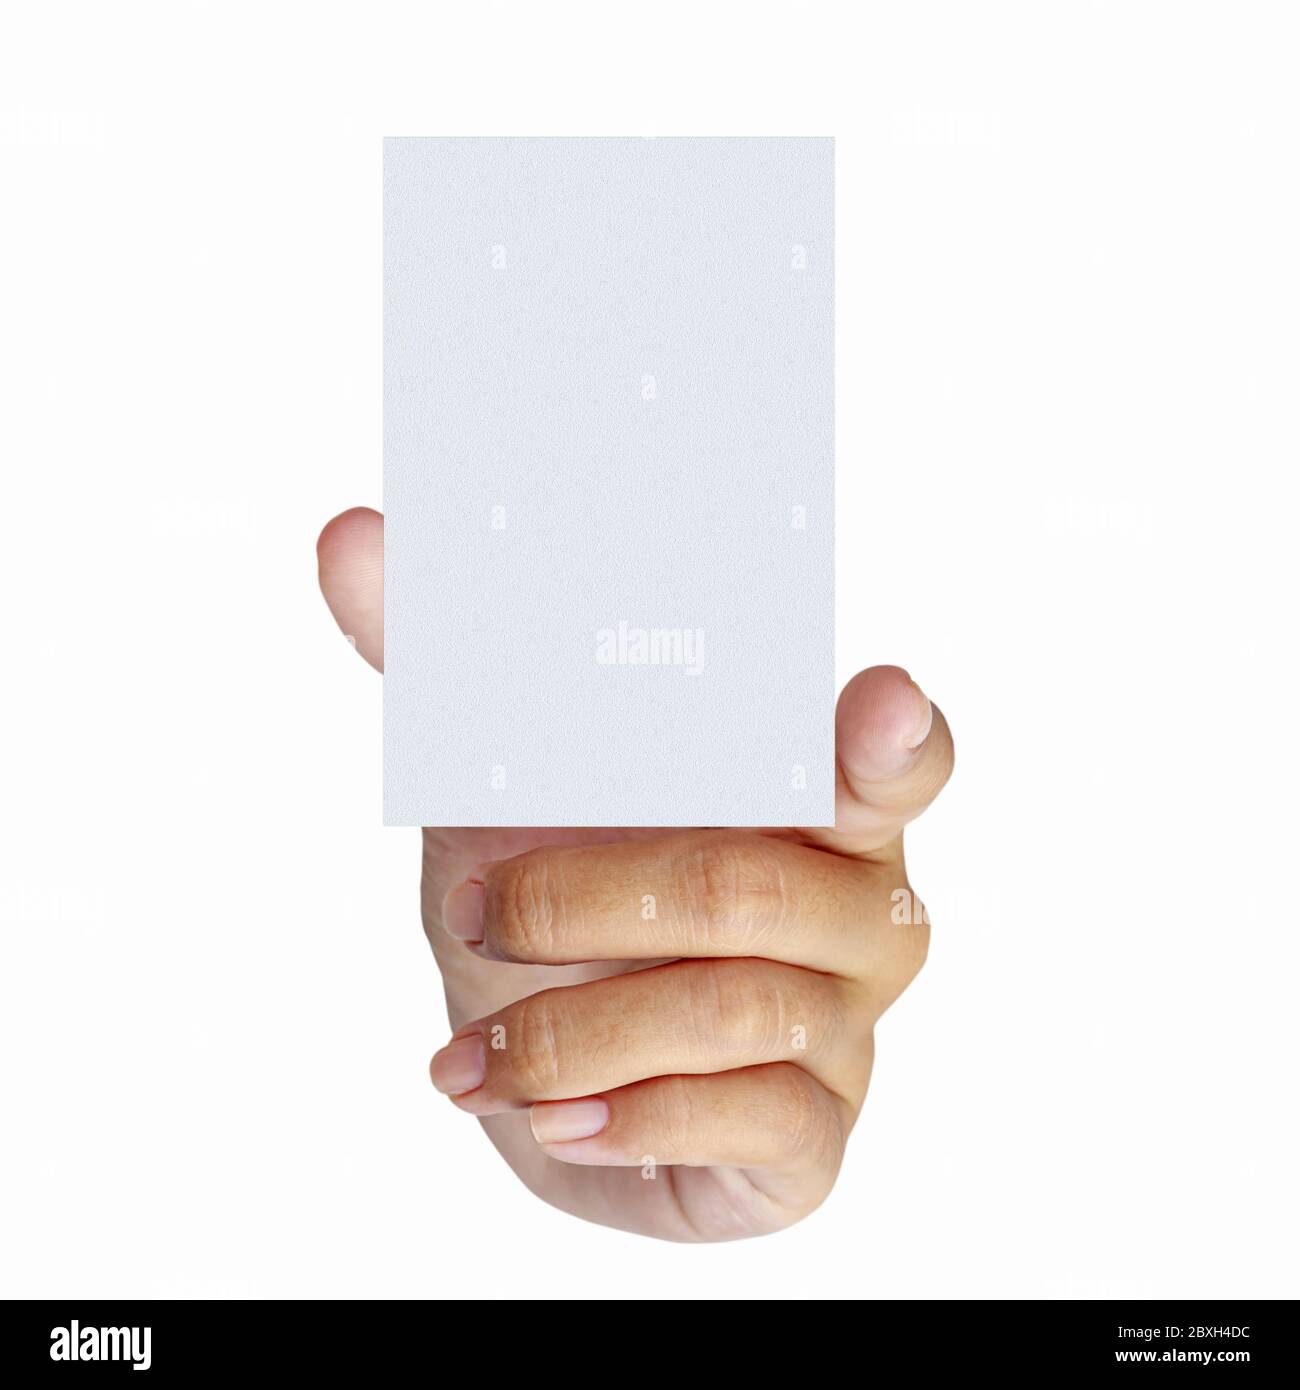 Caucasian hand holding up a blank white credit card Stock Photo